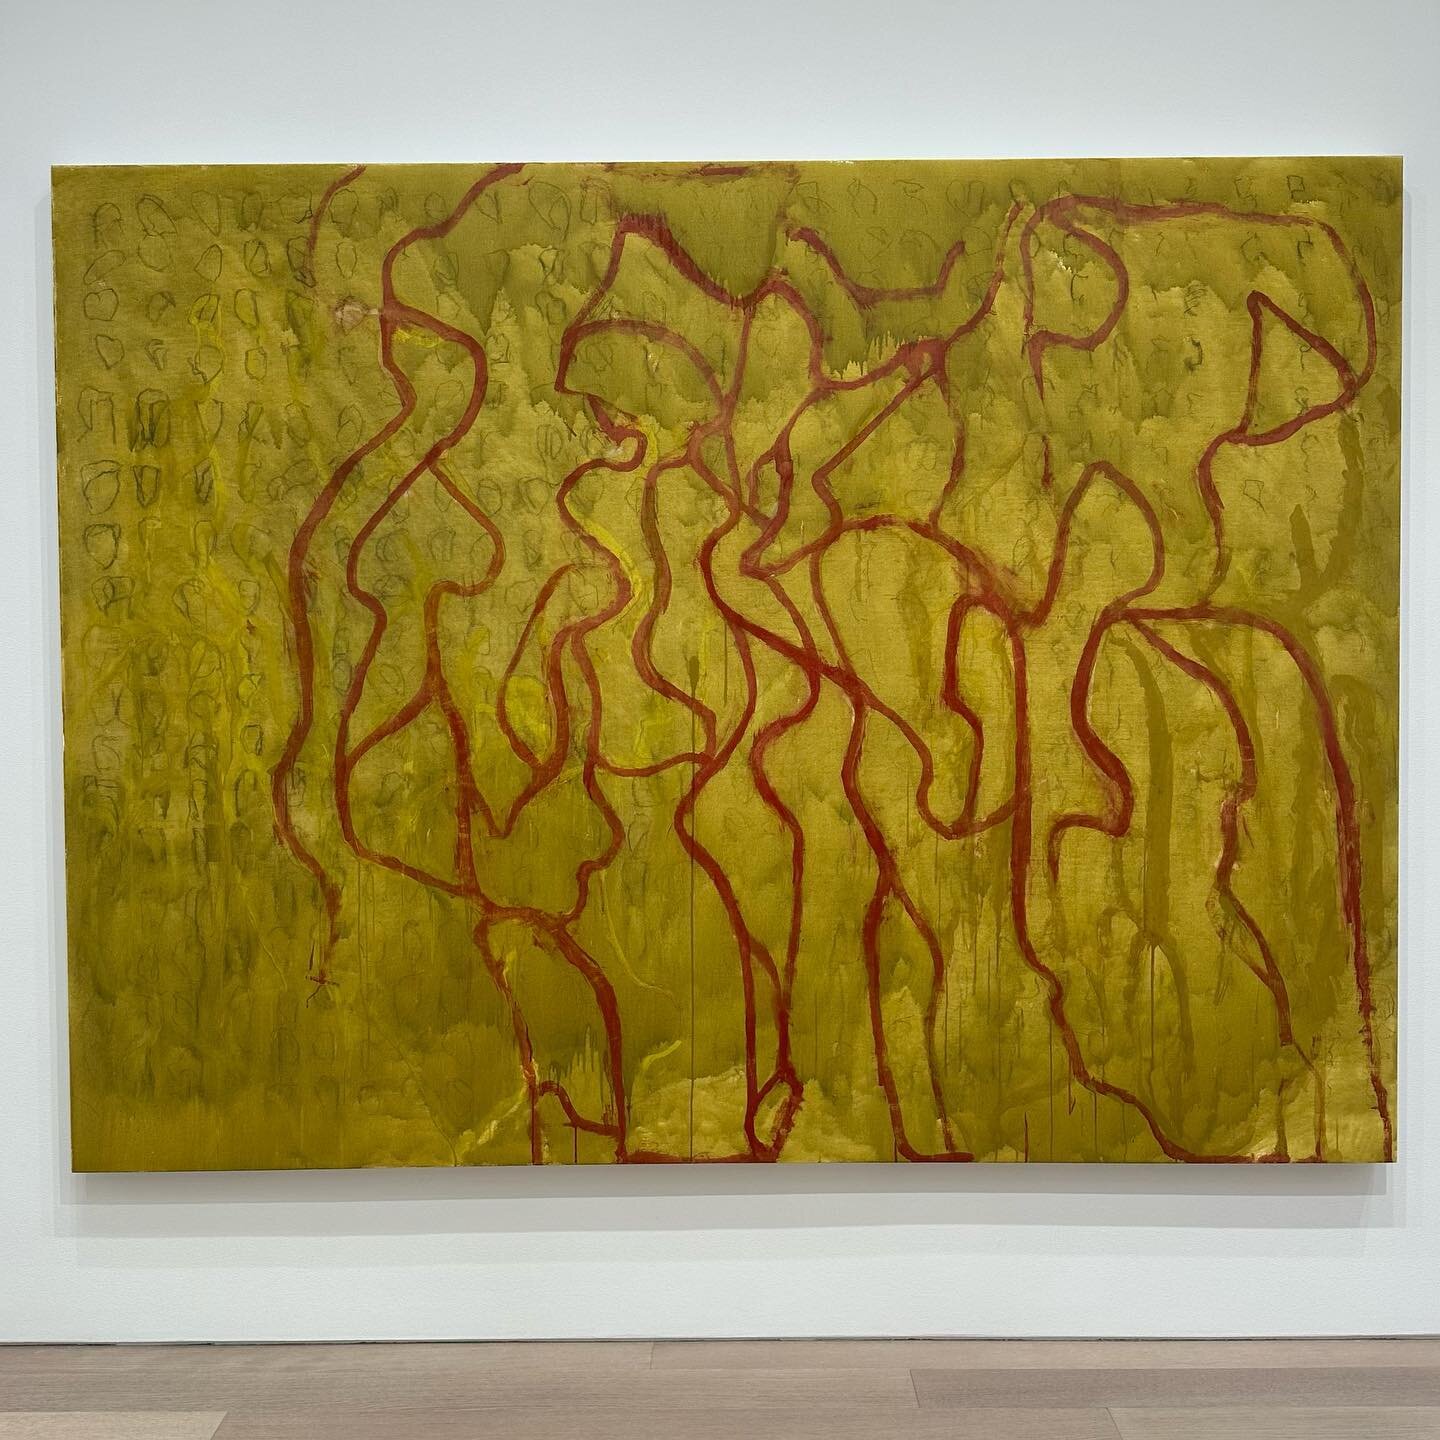 Beautiful afternoon at galleries on the Upper East Side. Got to enjoy incredible light on my walk home through Central Park!

Brice Marden @planeimage at Gagosian @gagosian

Tracey Emin @traceyeminstudio at the new White Cube @whitecube

Picasso and 